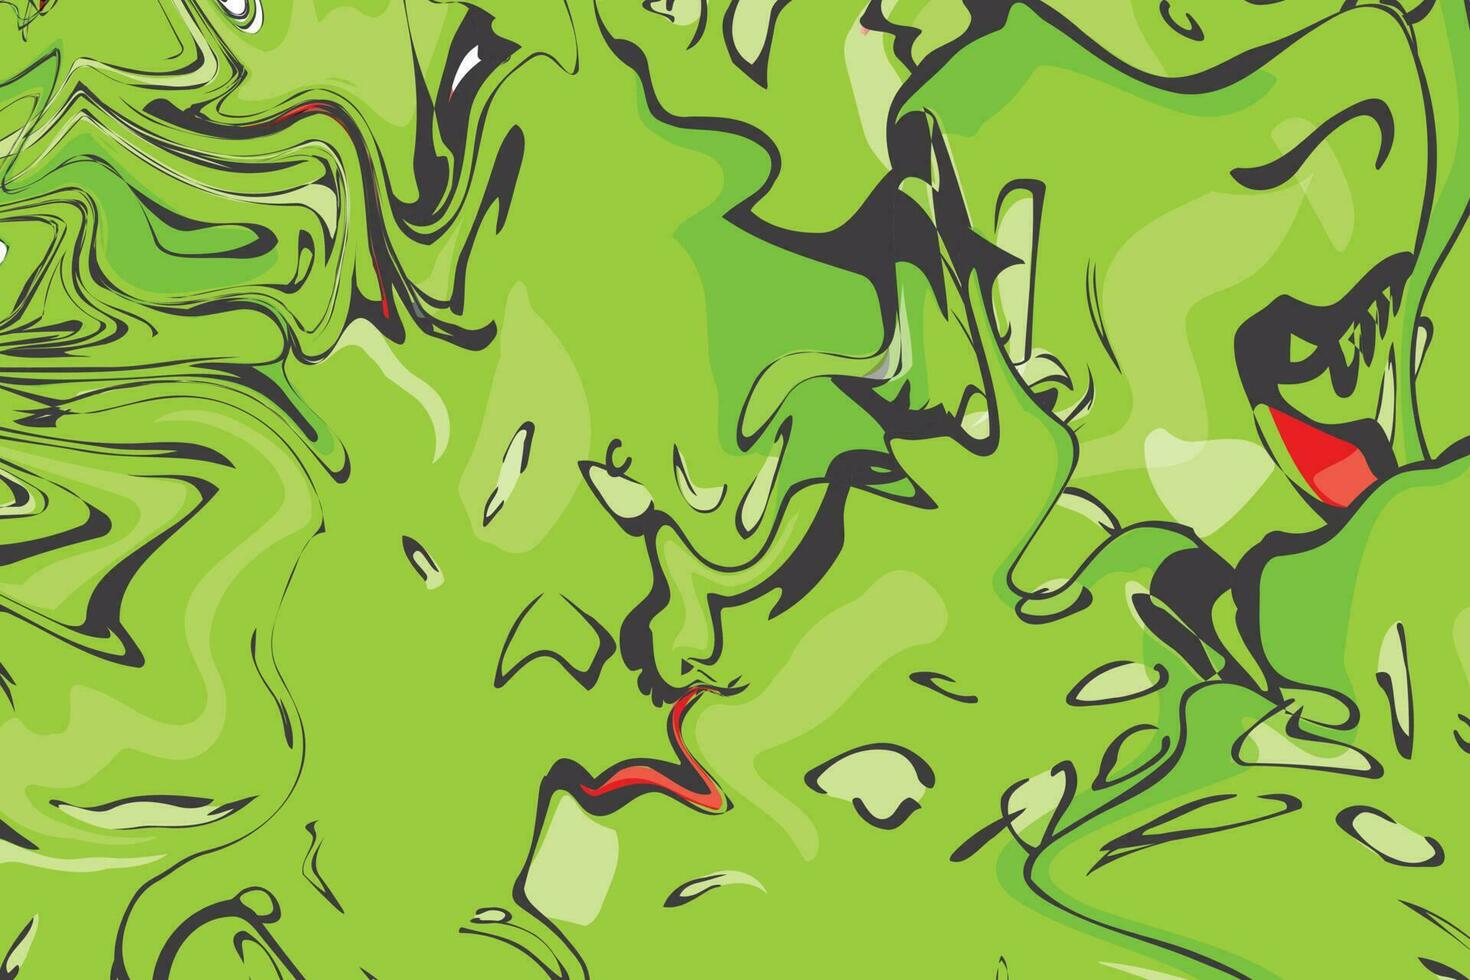 Abstract vector horizontal acid green pattern. Background with blots and stains, imitation of blurred paint.